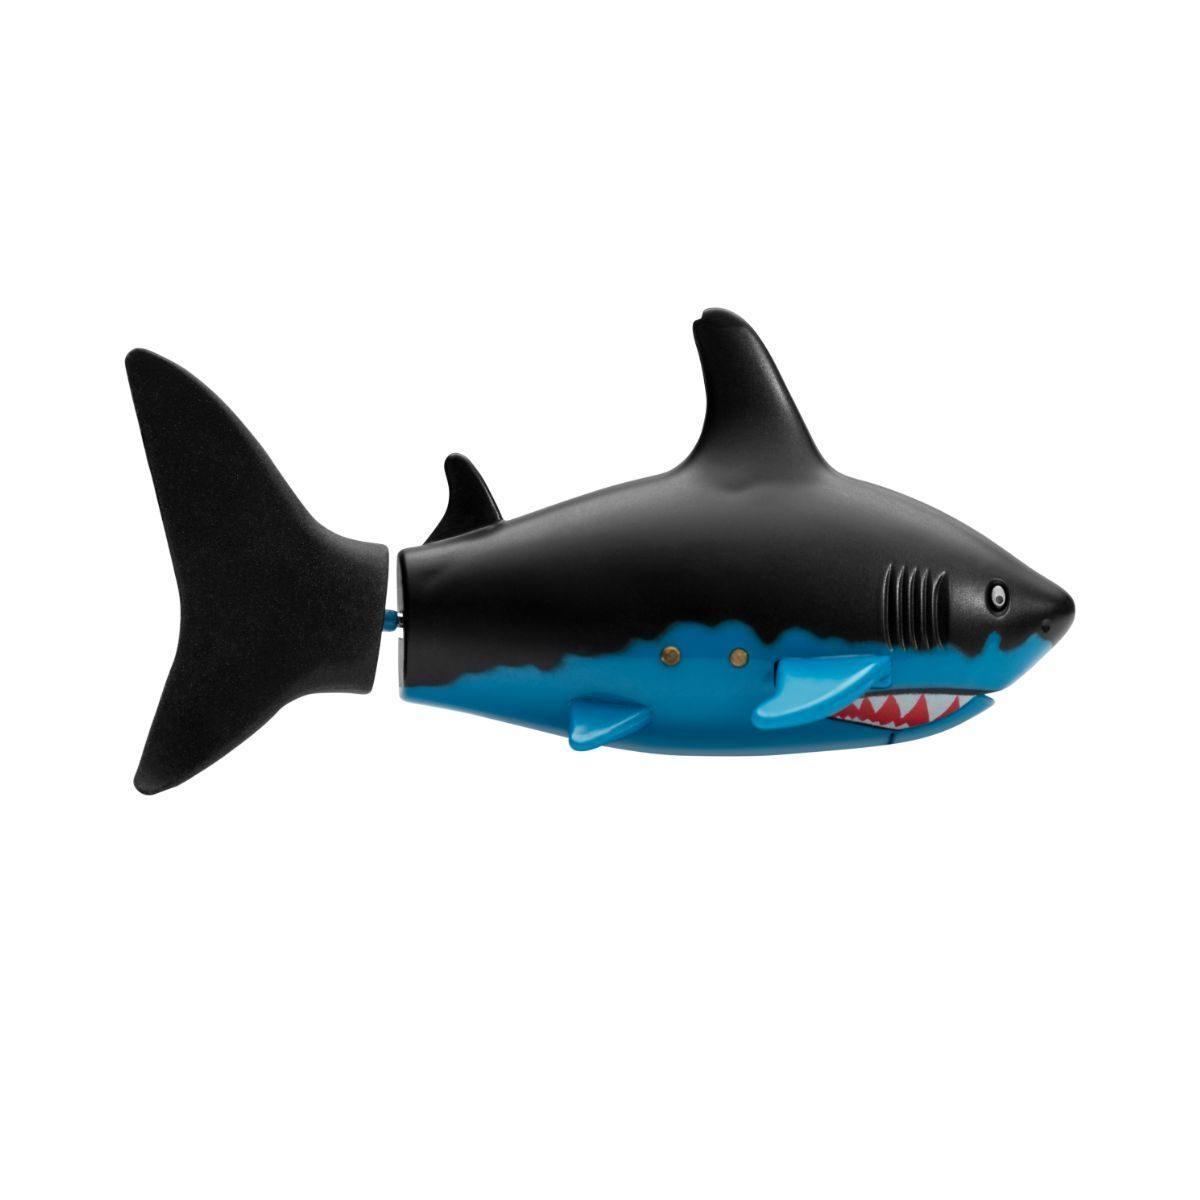 Gadget Monster Remote Controlled Shark